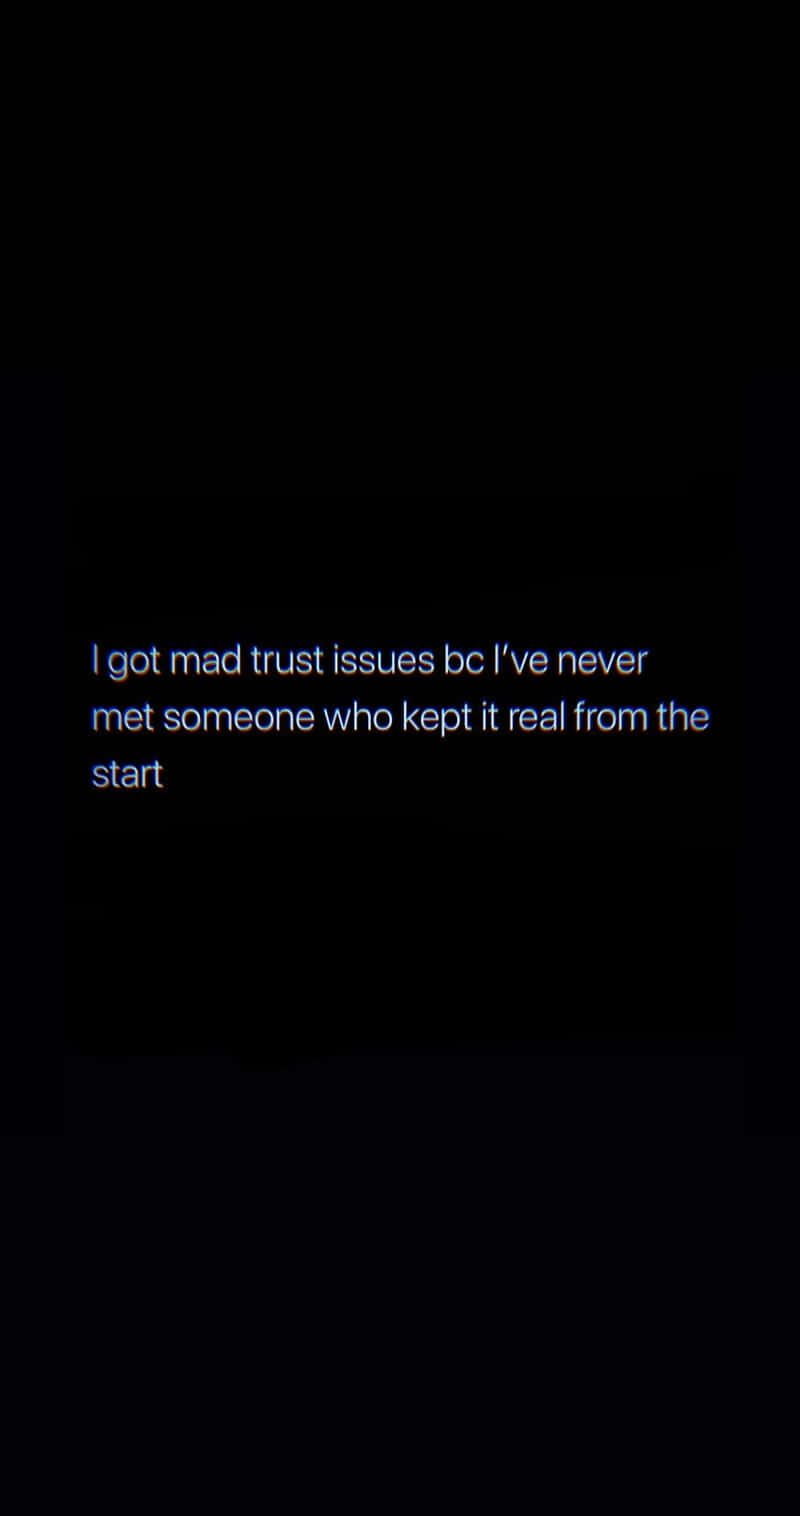 Trust Issues Quote Black Background Wallpaper